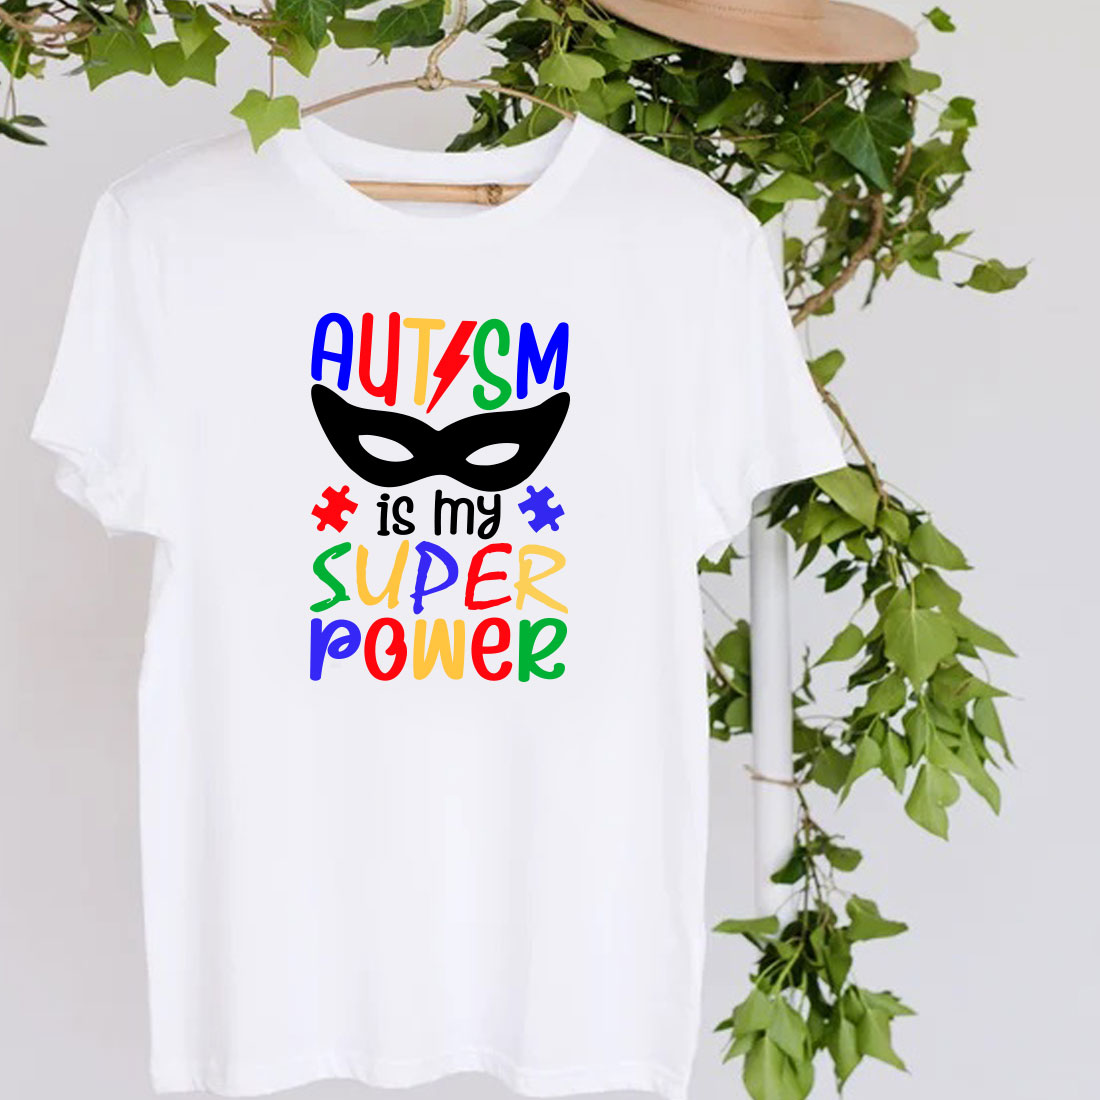 T - shirt that says autism is my super power.